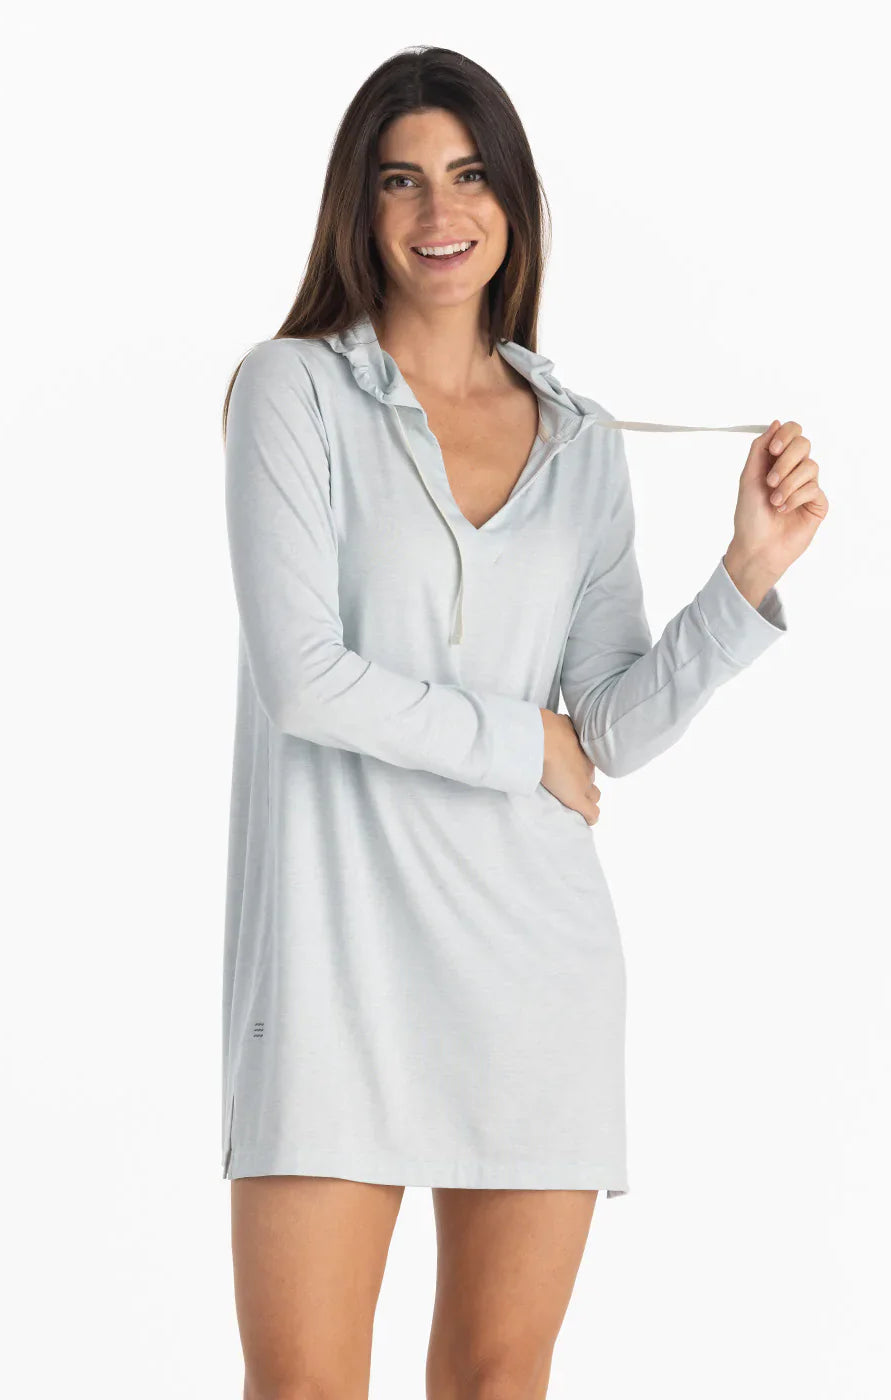 Free Fly: Women's Elevate Hooded Cover Up